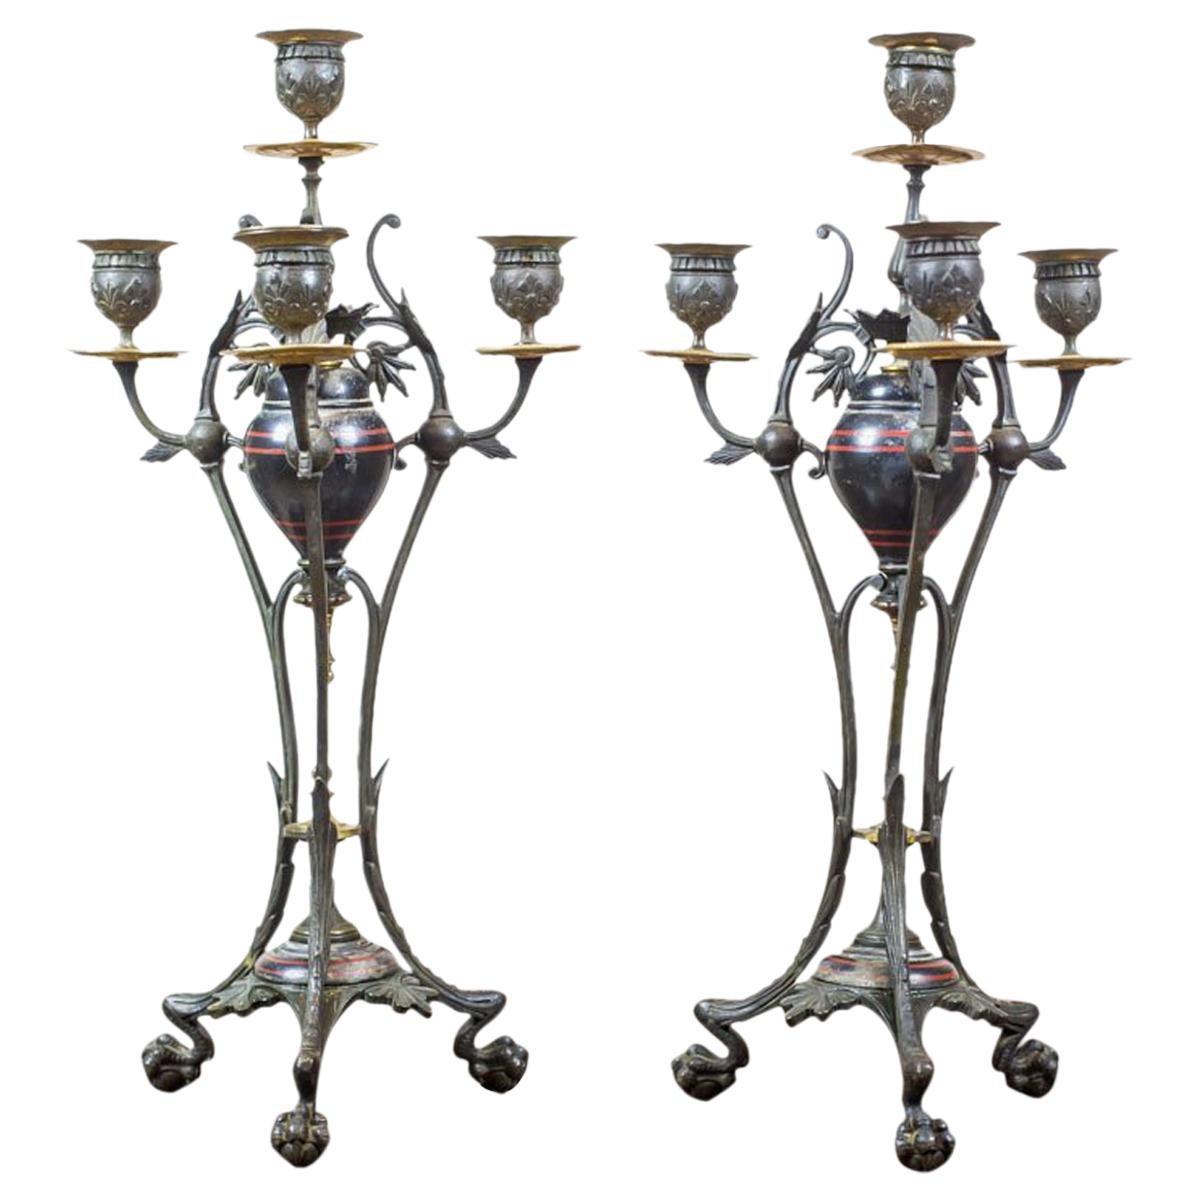 Pair of Candlesticks from the Turn of the 19th and 20th Centuries For Sale